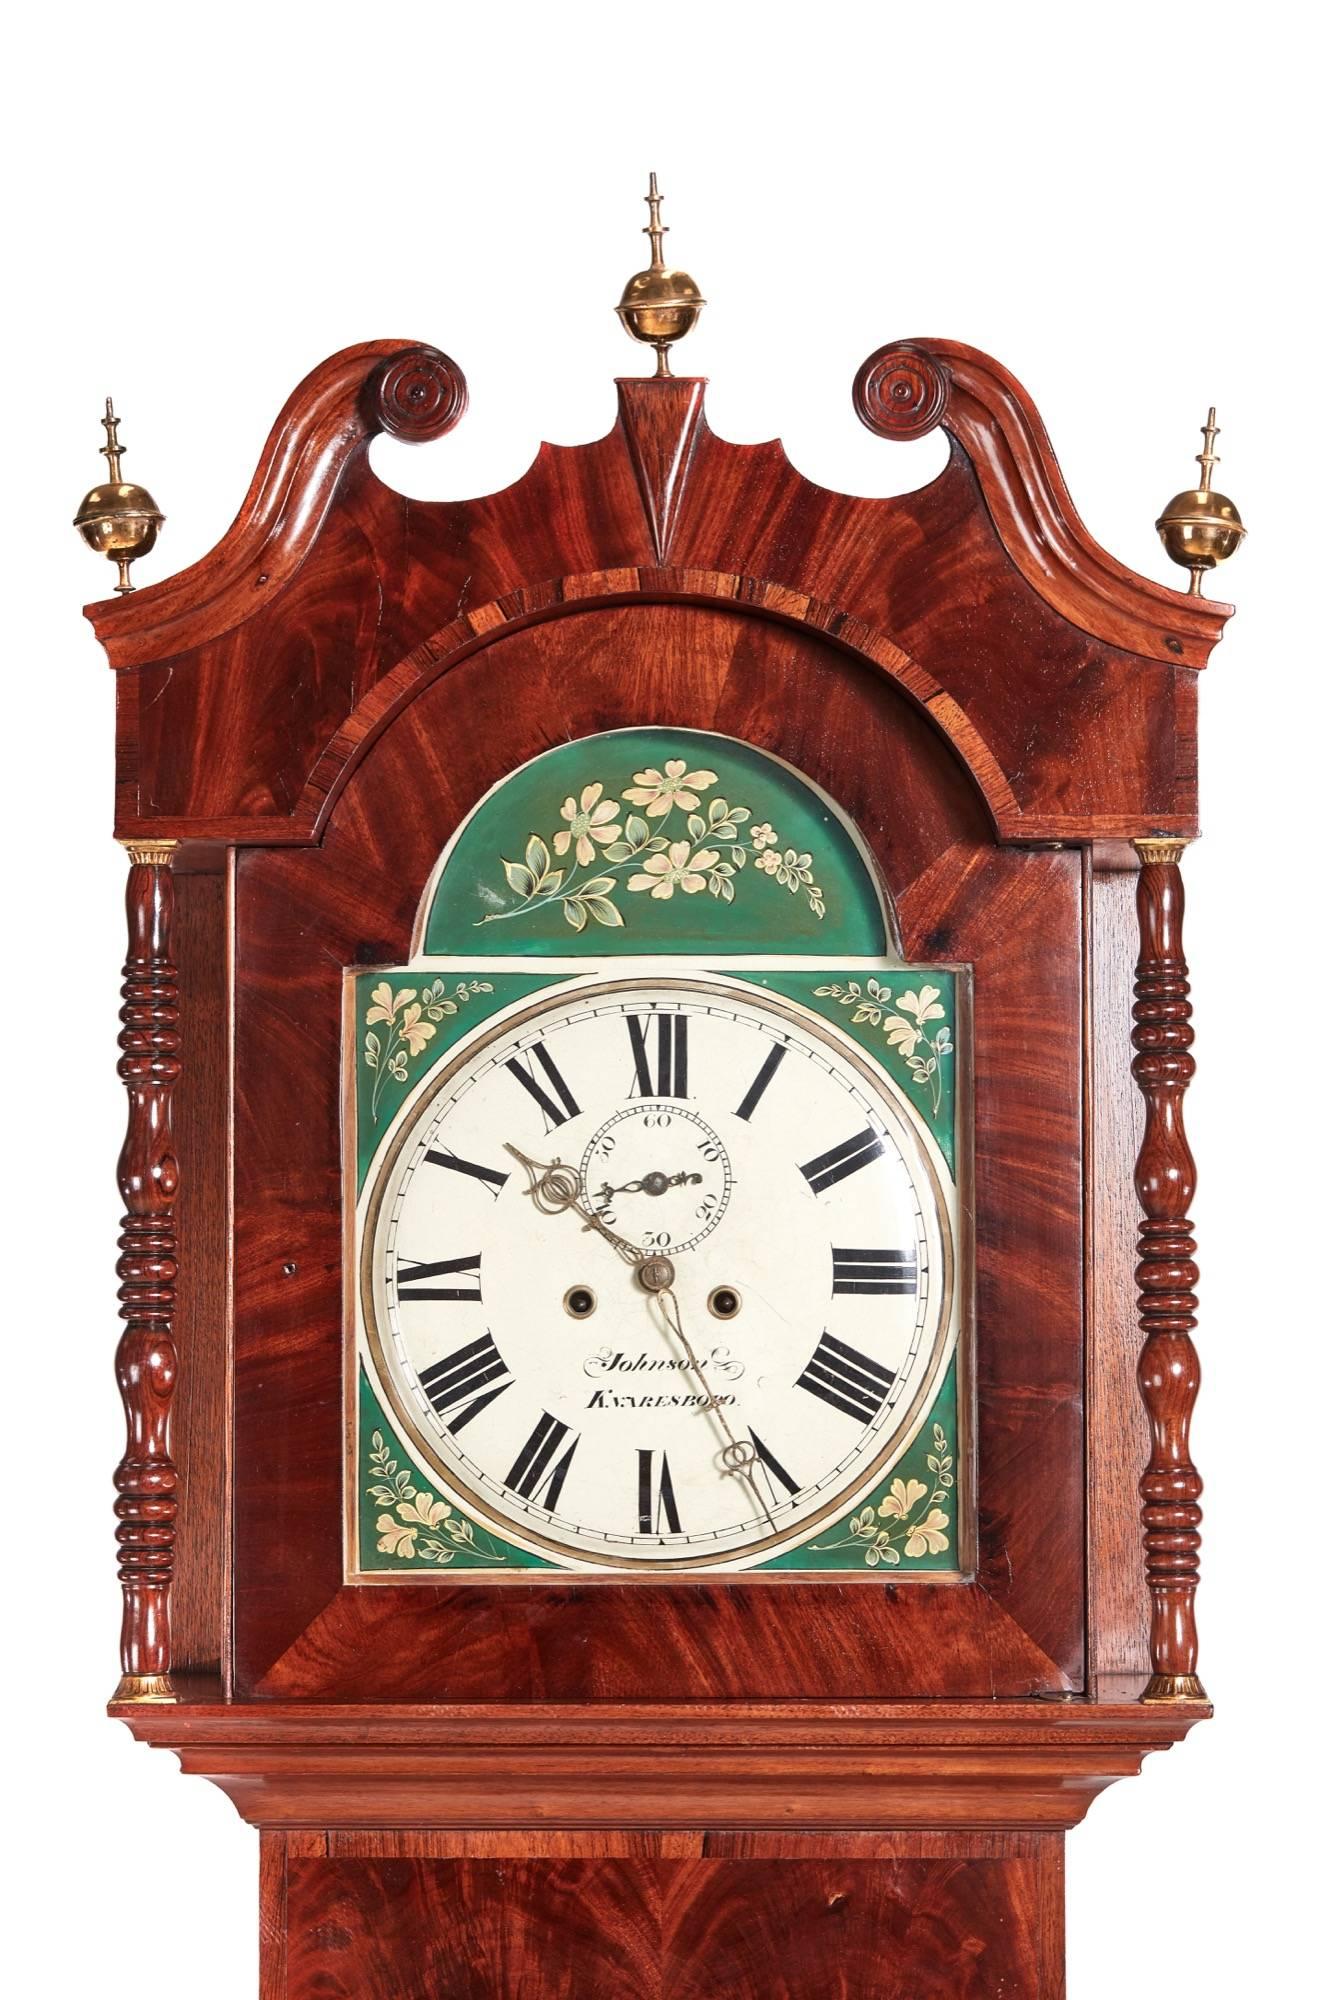 painted grandfather clock faces